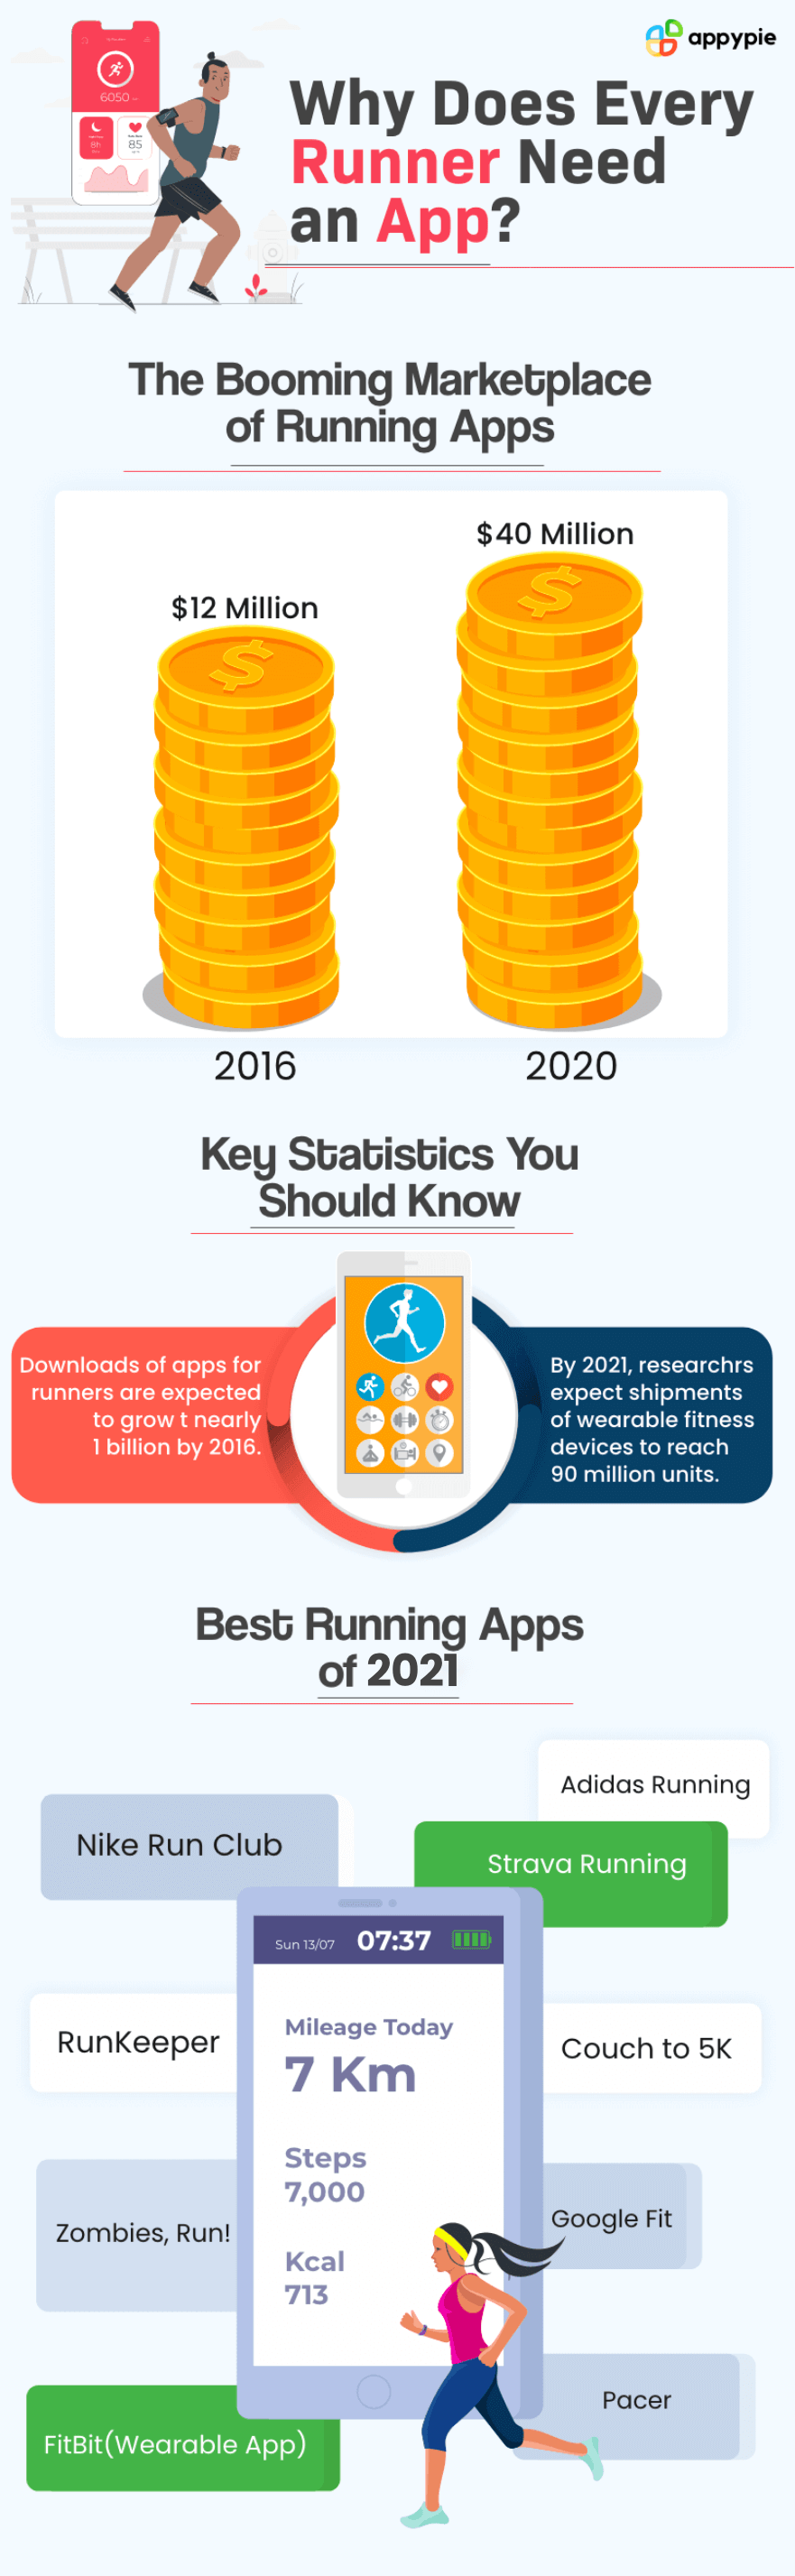 Why Dose every runner need an app - Appy pie